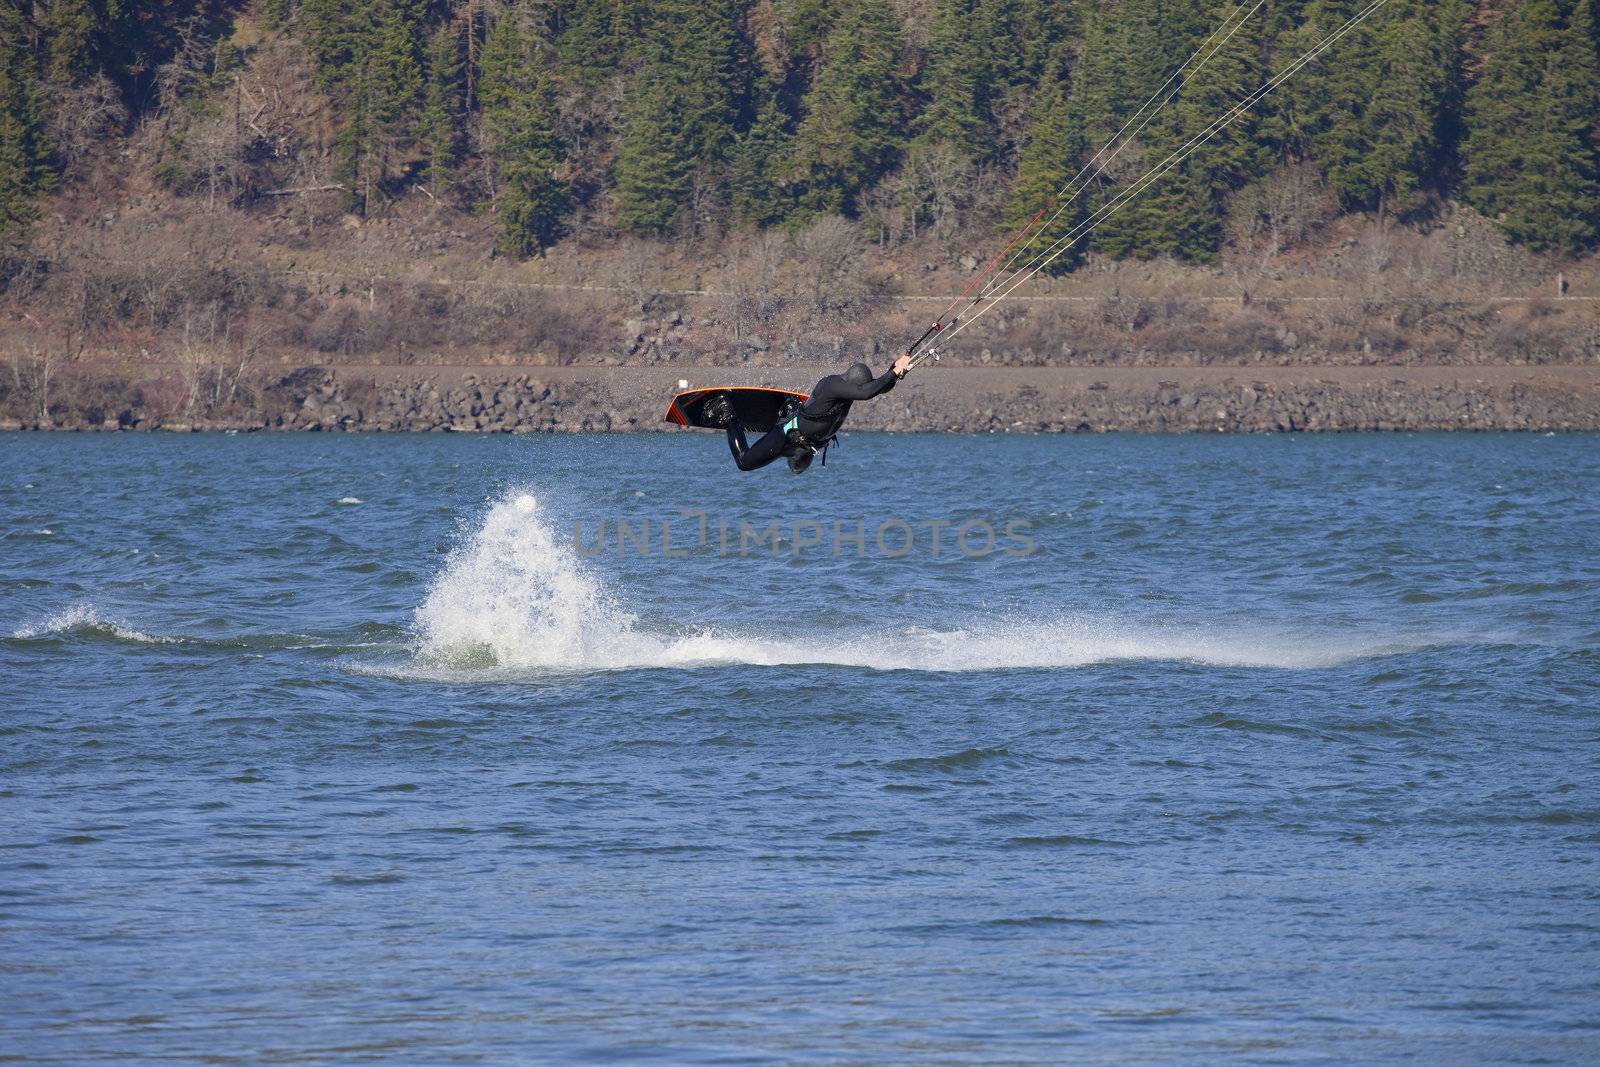 Wind surfer riding the wind, Hood river OR. by Rigucci